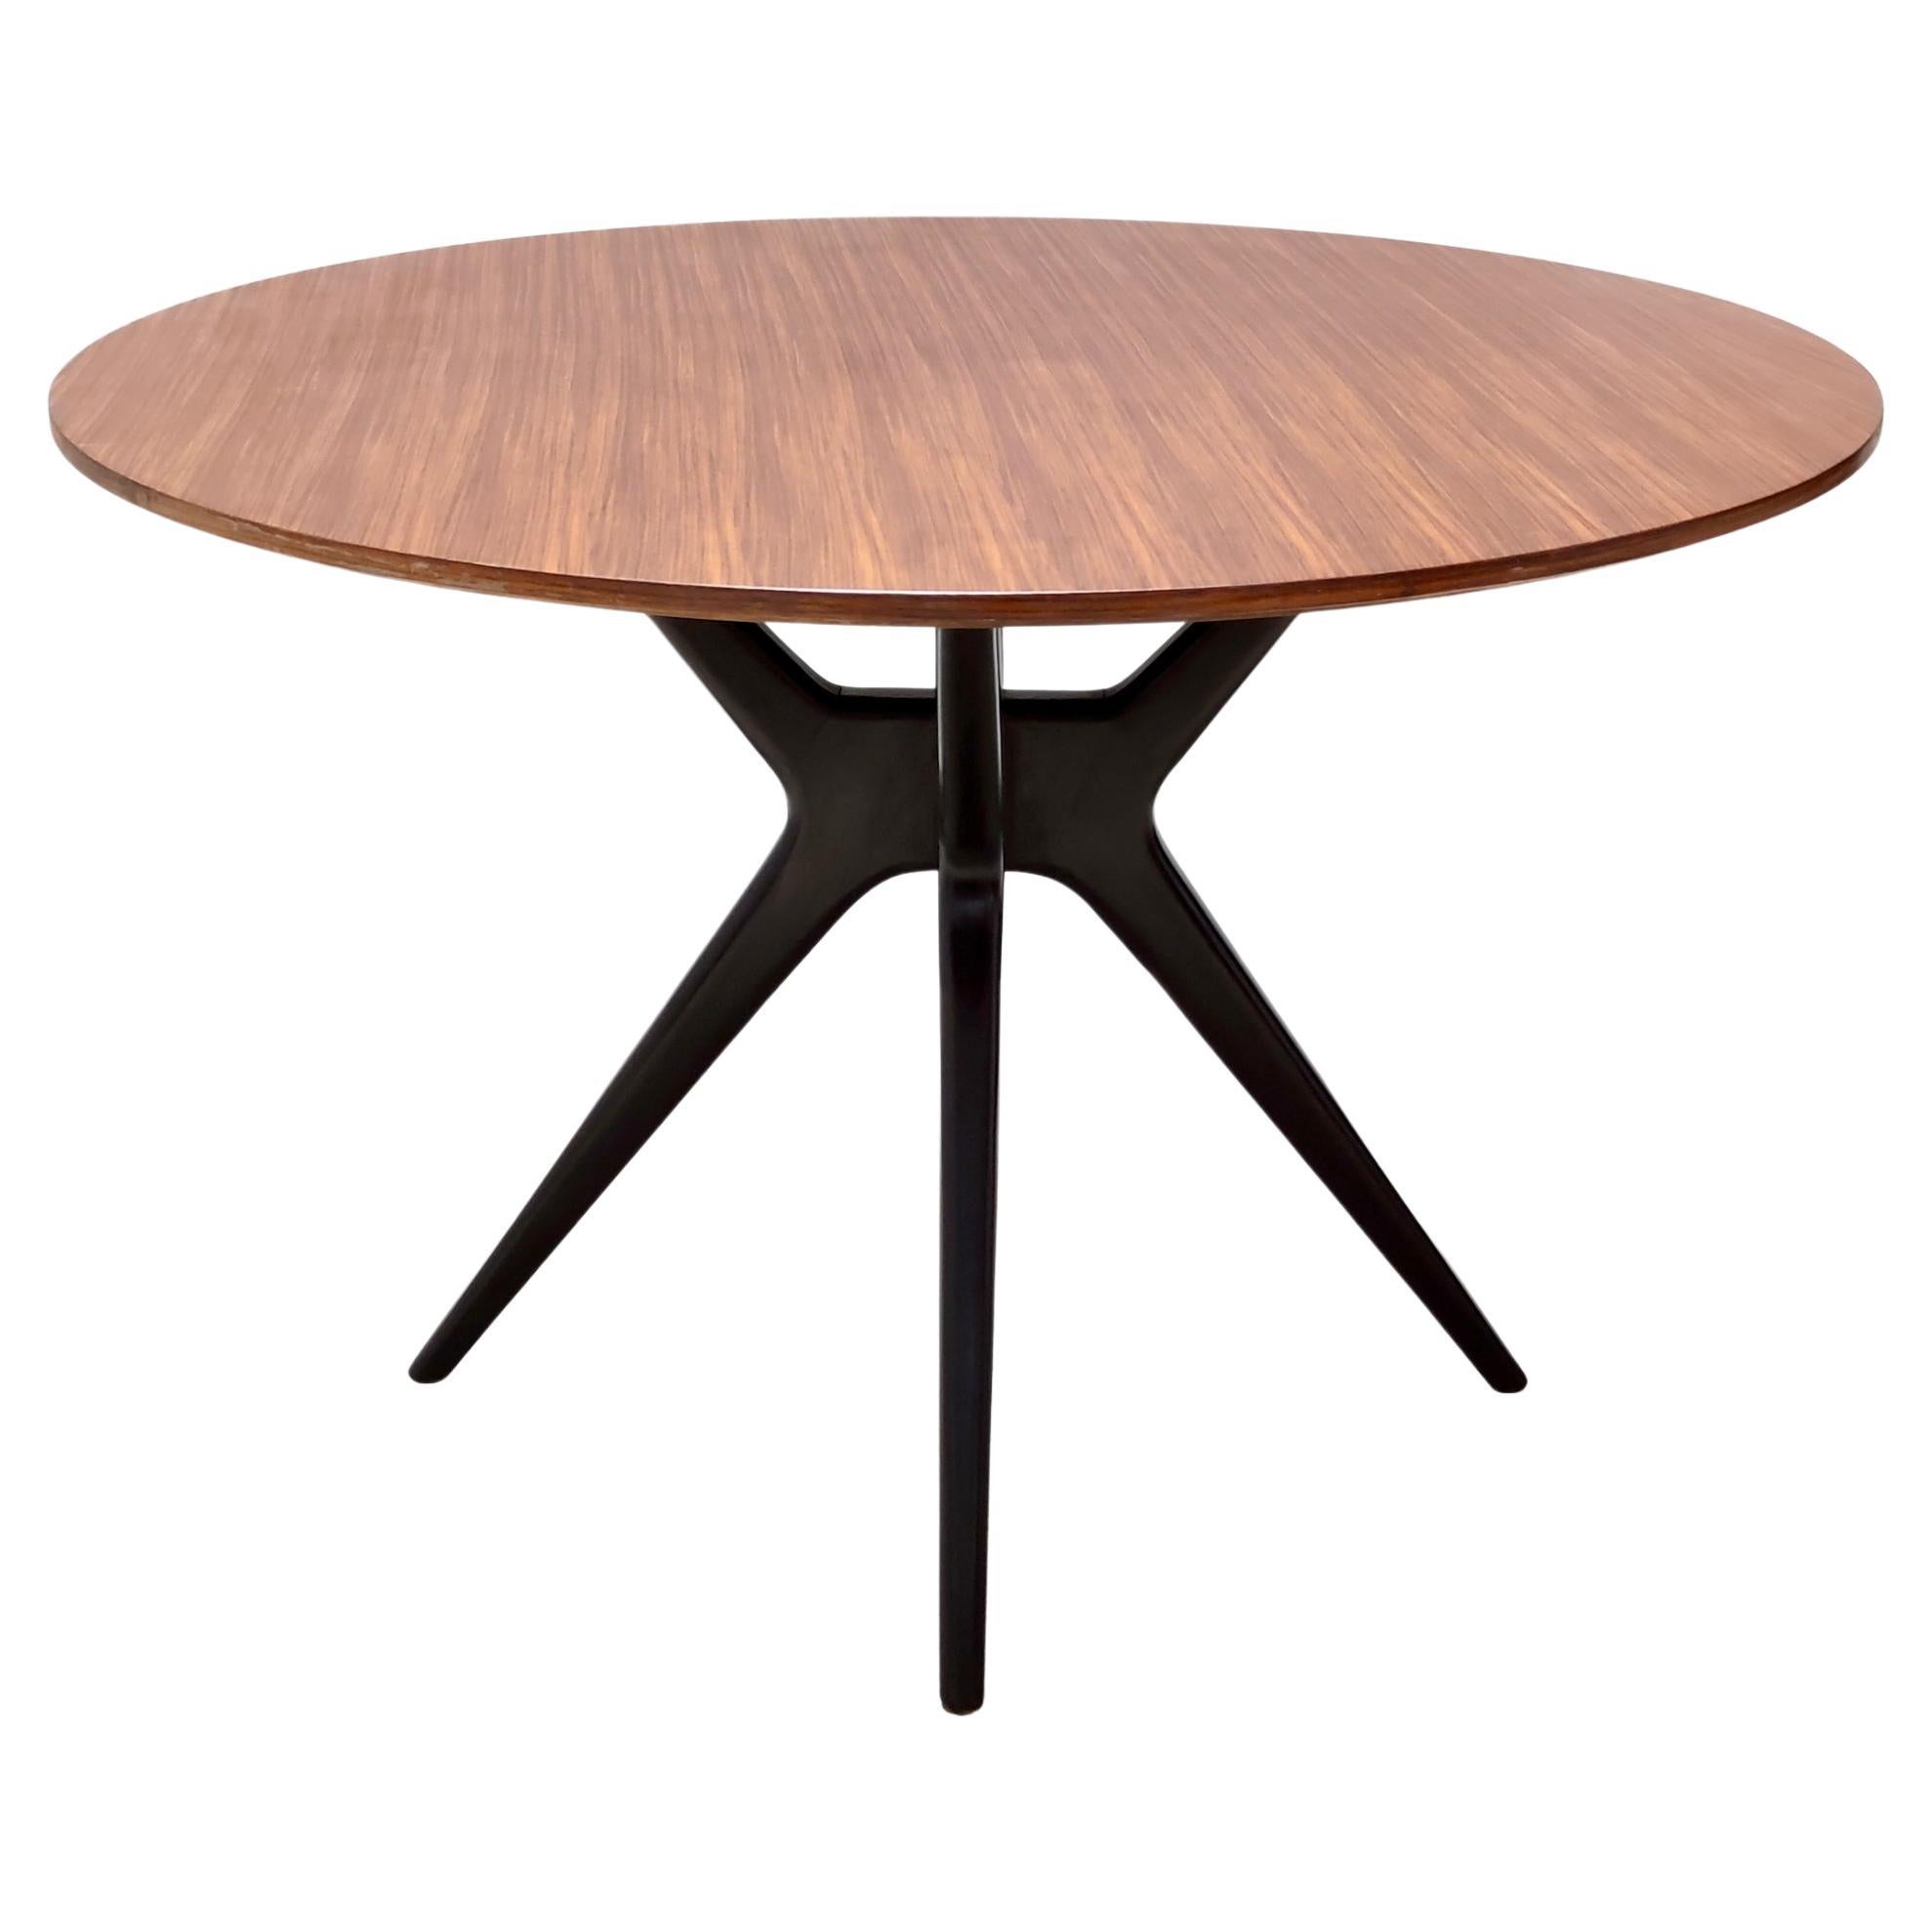 Round Ebonized Walnut and Beech Dining Table in the style of Ico Parisi, Italy